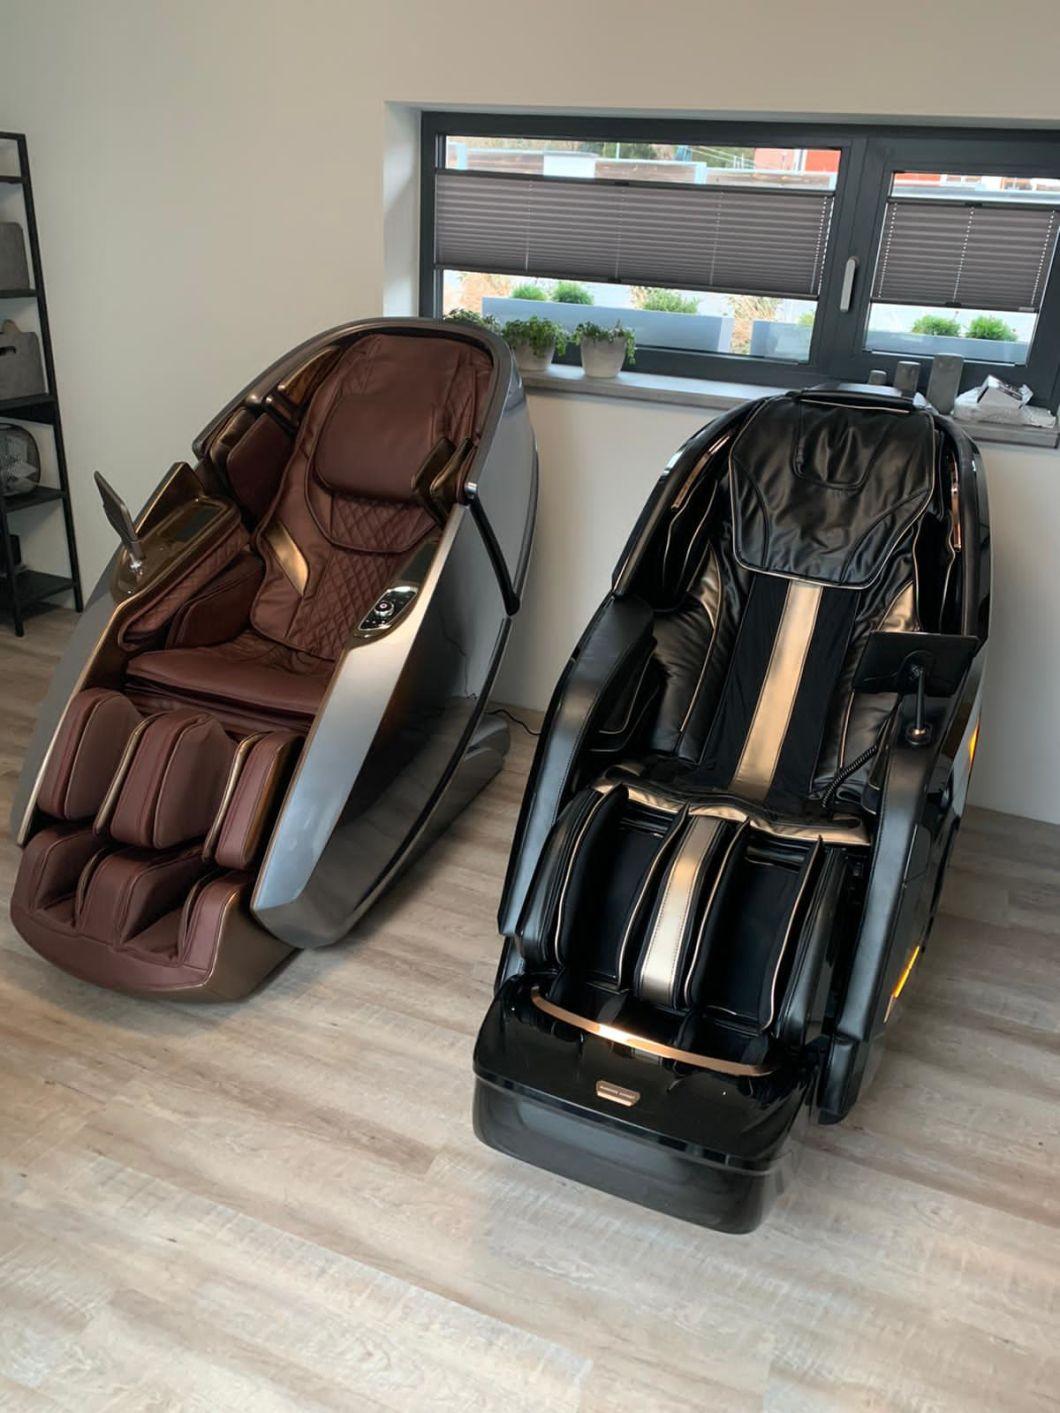 Luxury Health Care Full Body Massage Chair 4D at Home